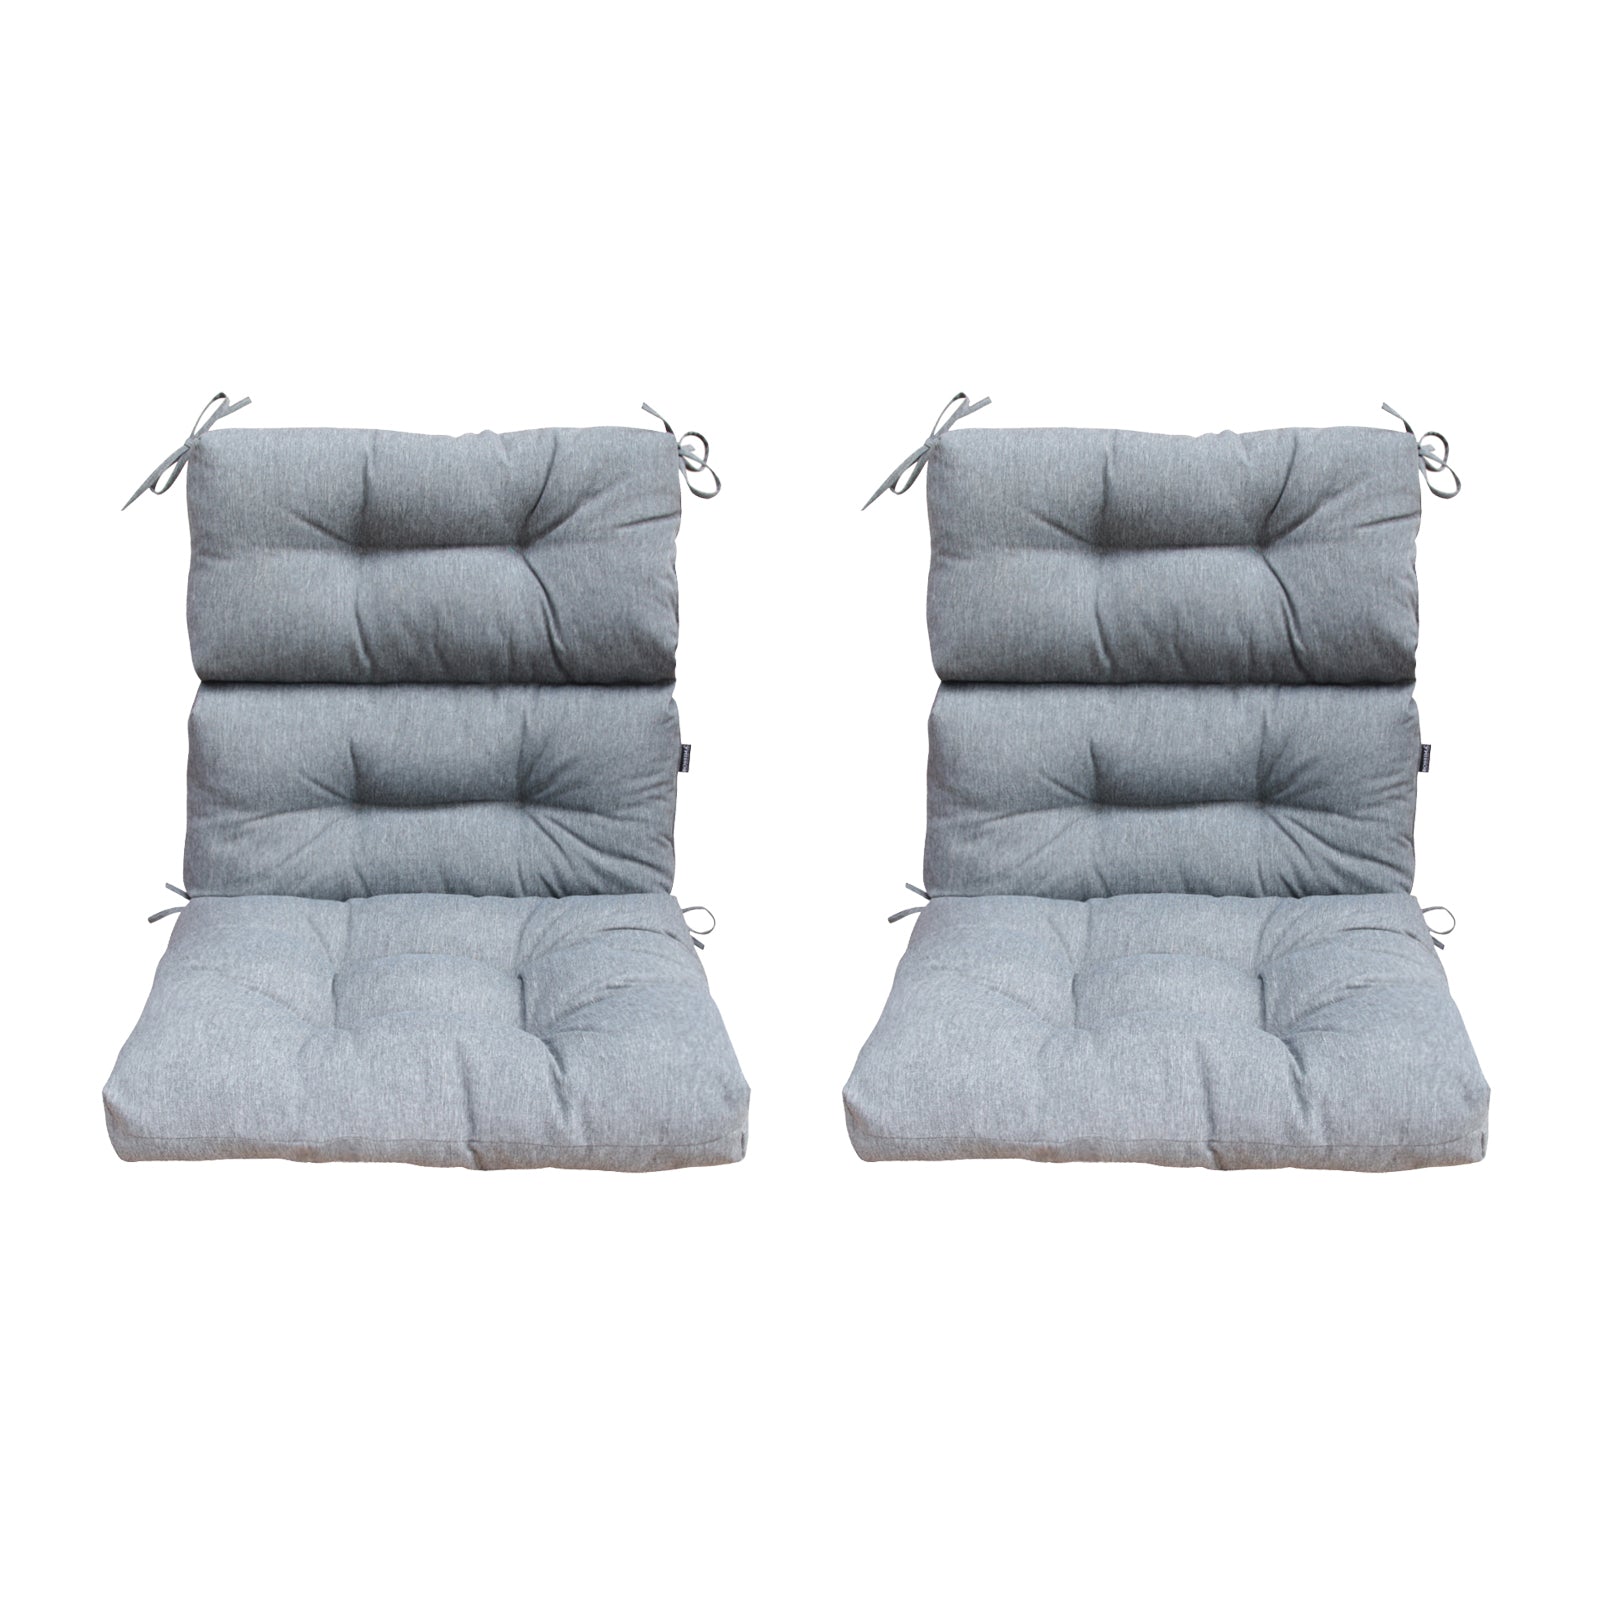 Outdoor Patio High Back Chair Cushions Tufted Square Corner Olefin Light Grey Set of 2